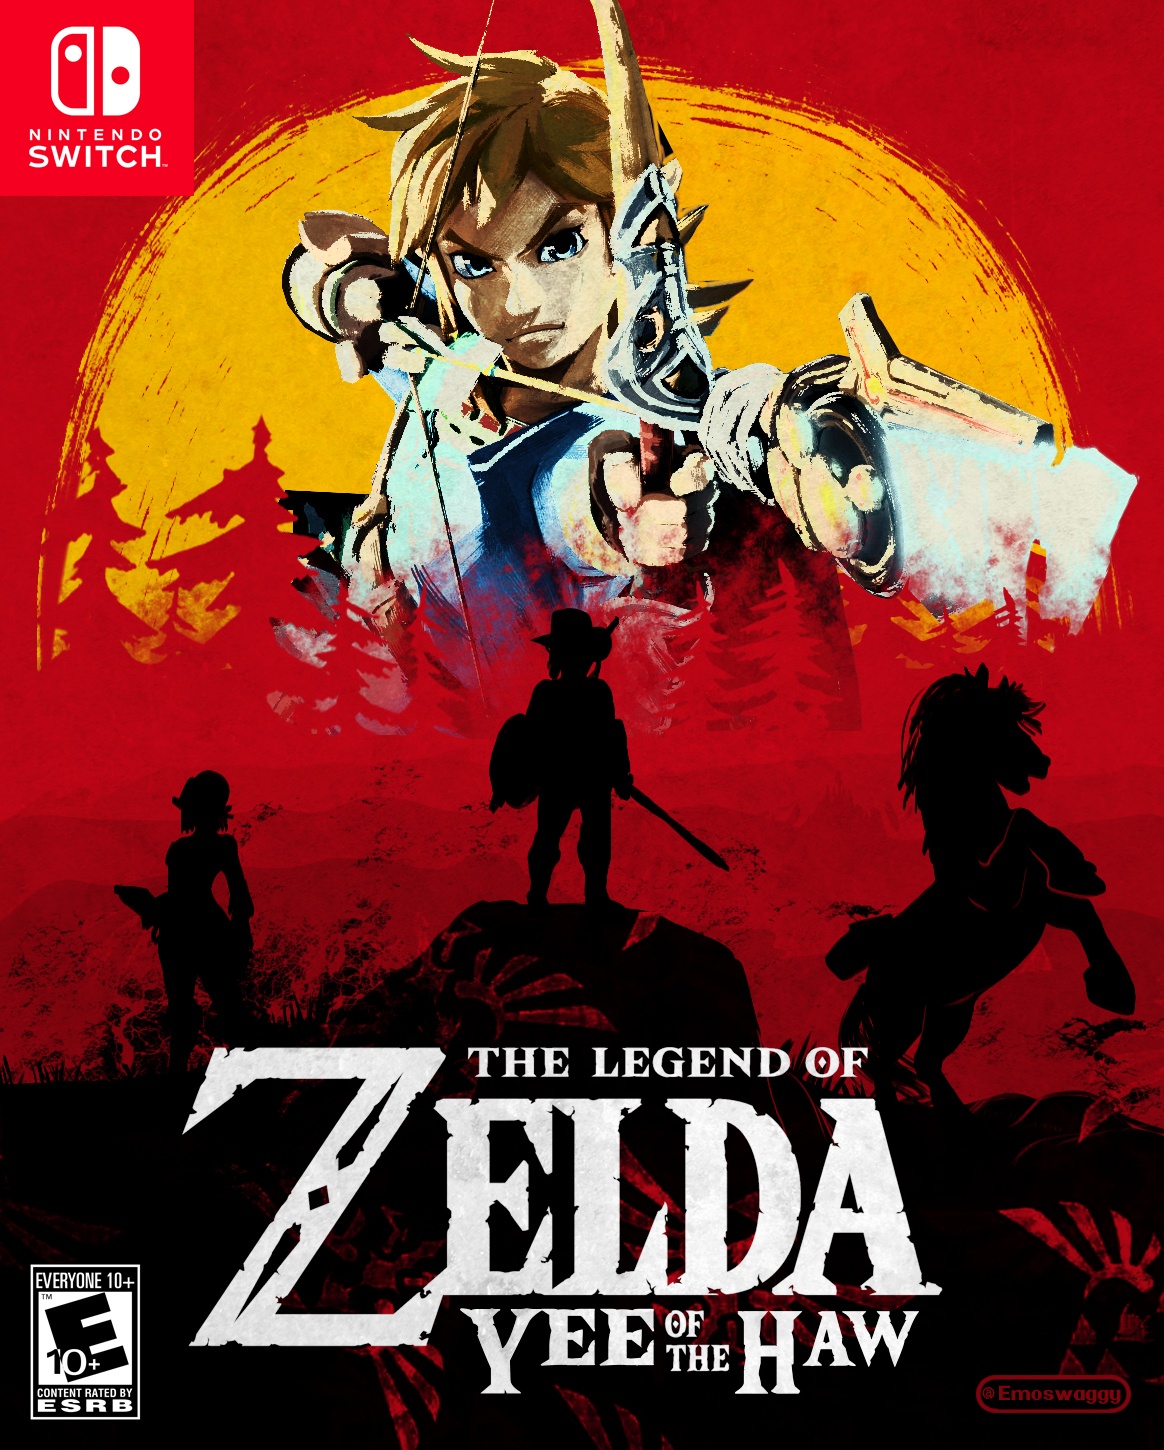 The Legend of Zelda: Yee of the Haw box cover